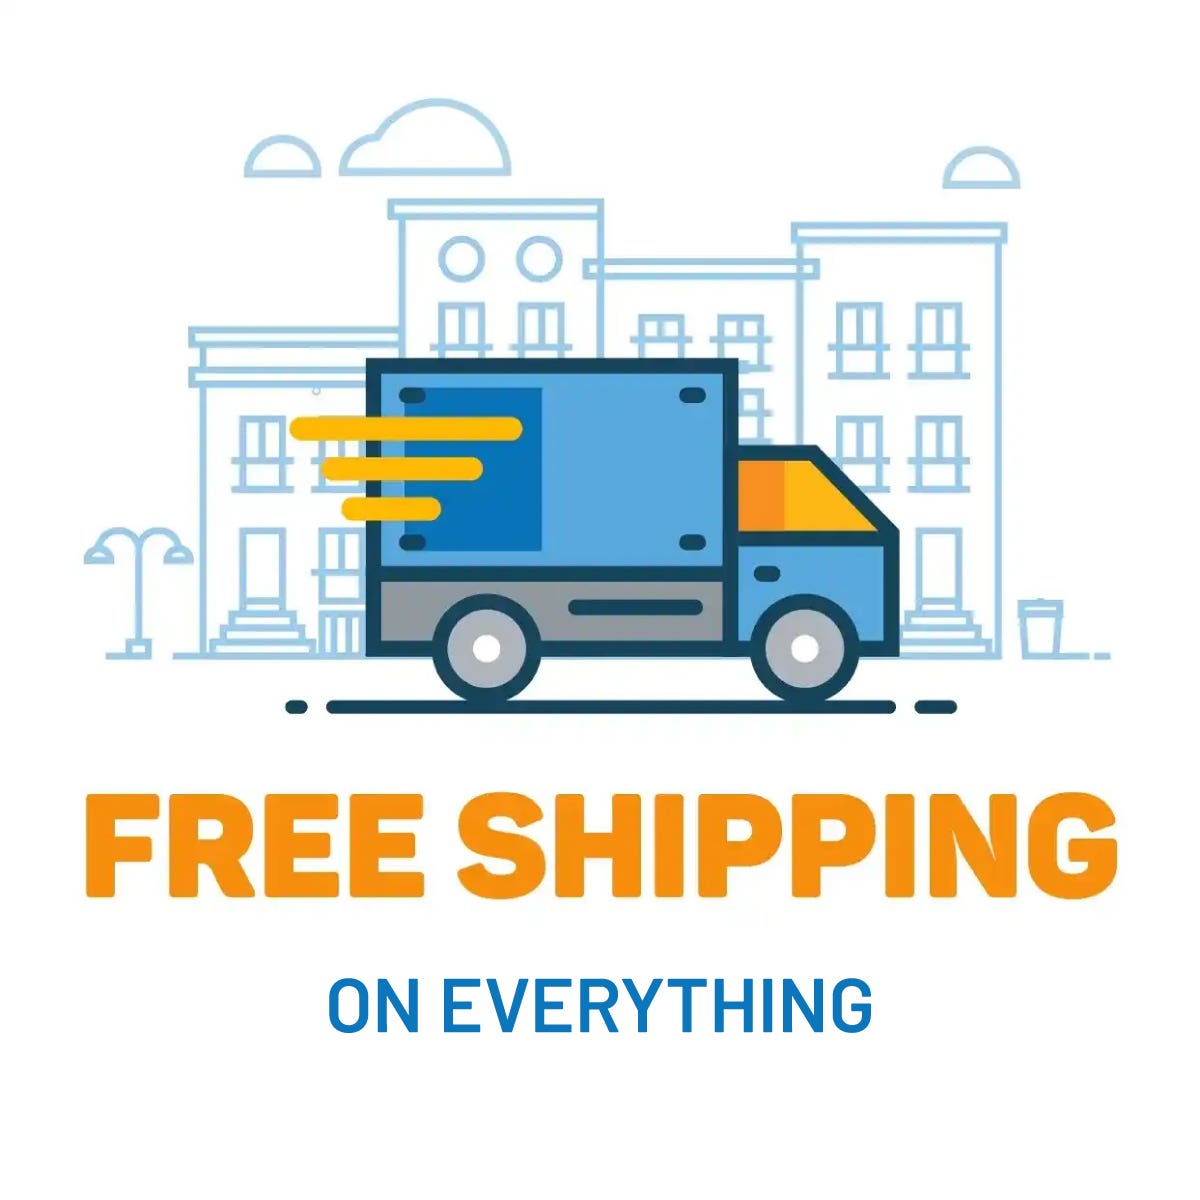 Free shipping on everything